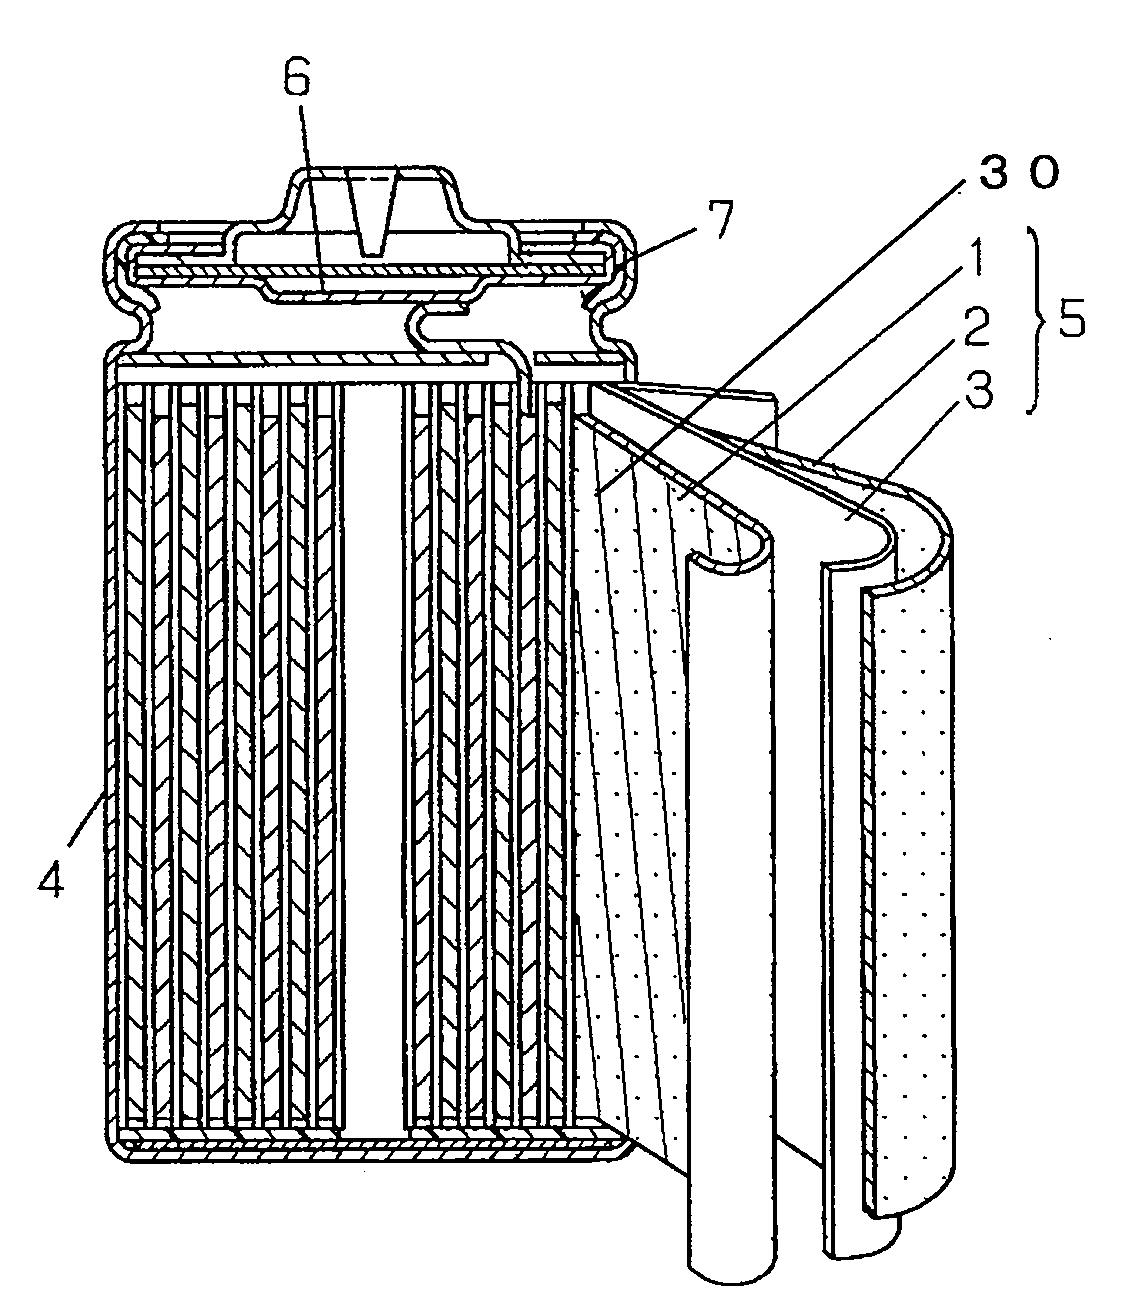 Secondary cell and its manufacturing method